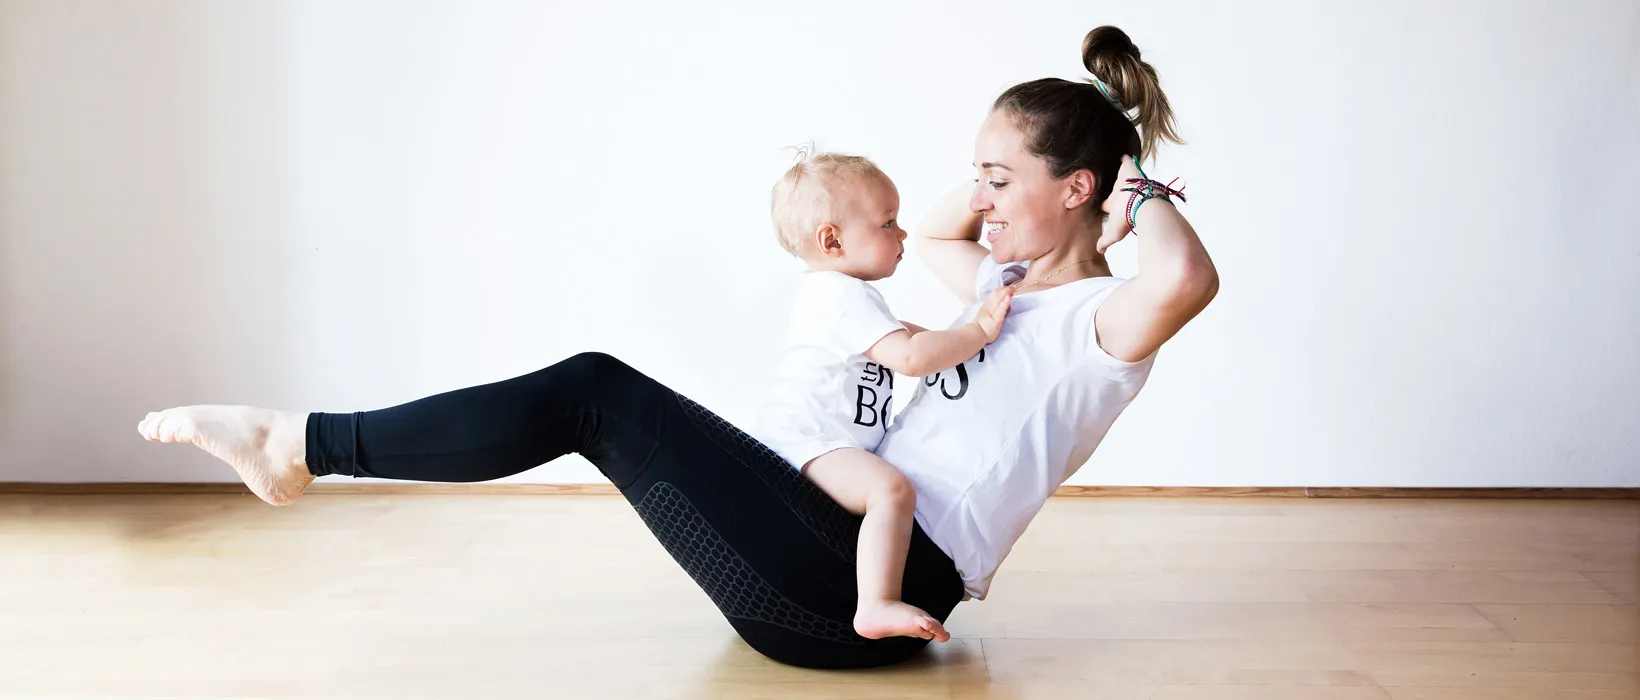 Anna Lena Kramss at workout with baby